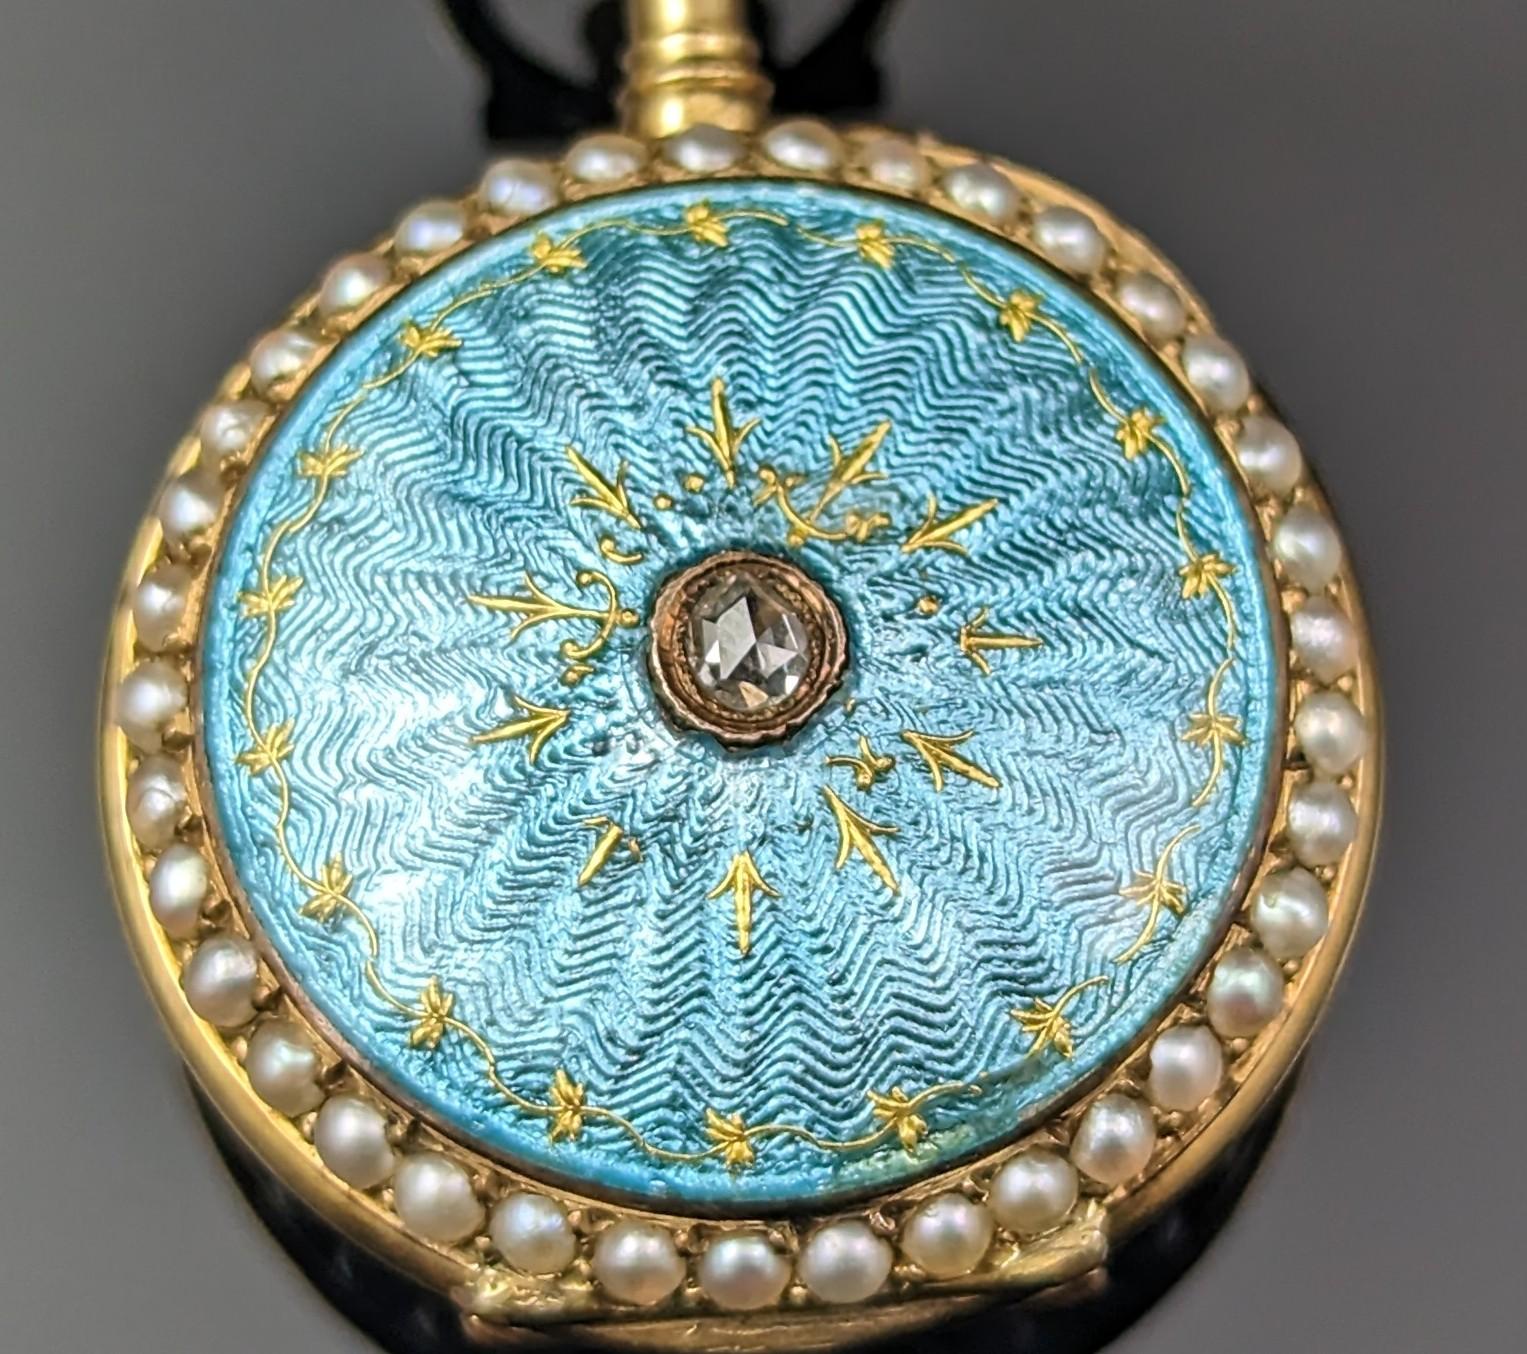 Antique Diamond and Pearl Fob Watch, 18 Karat Gold, Guilloche Enamel 4